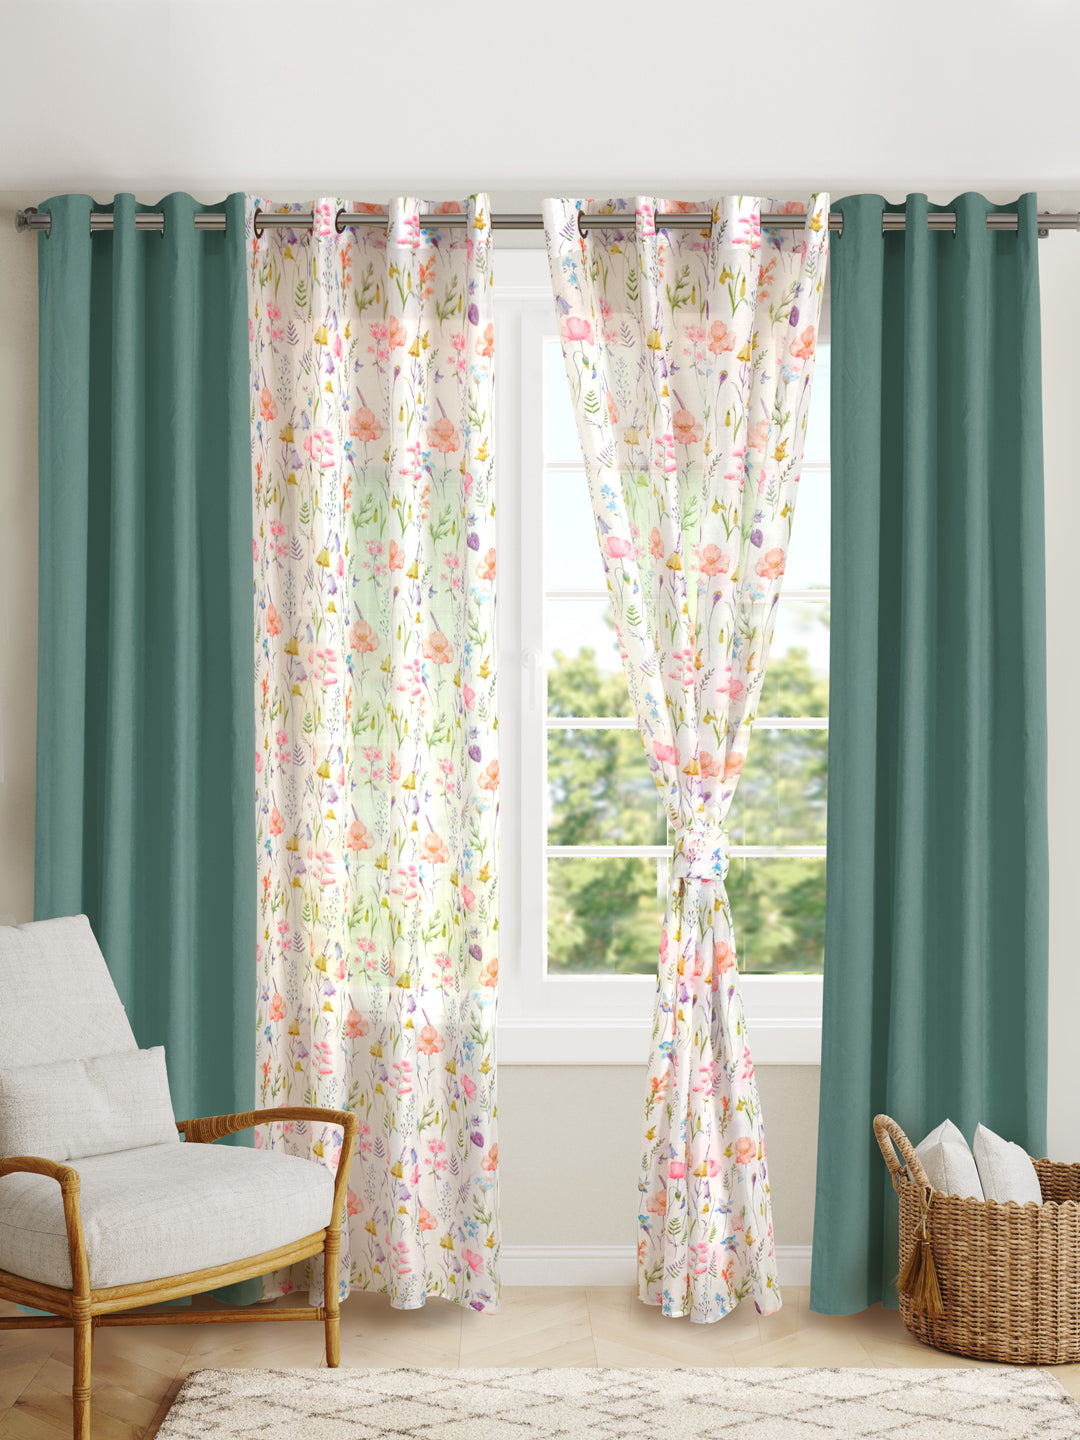 Set Of 4 Floral Garden Printed With Green Plain 7Ft. Curtain